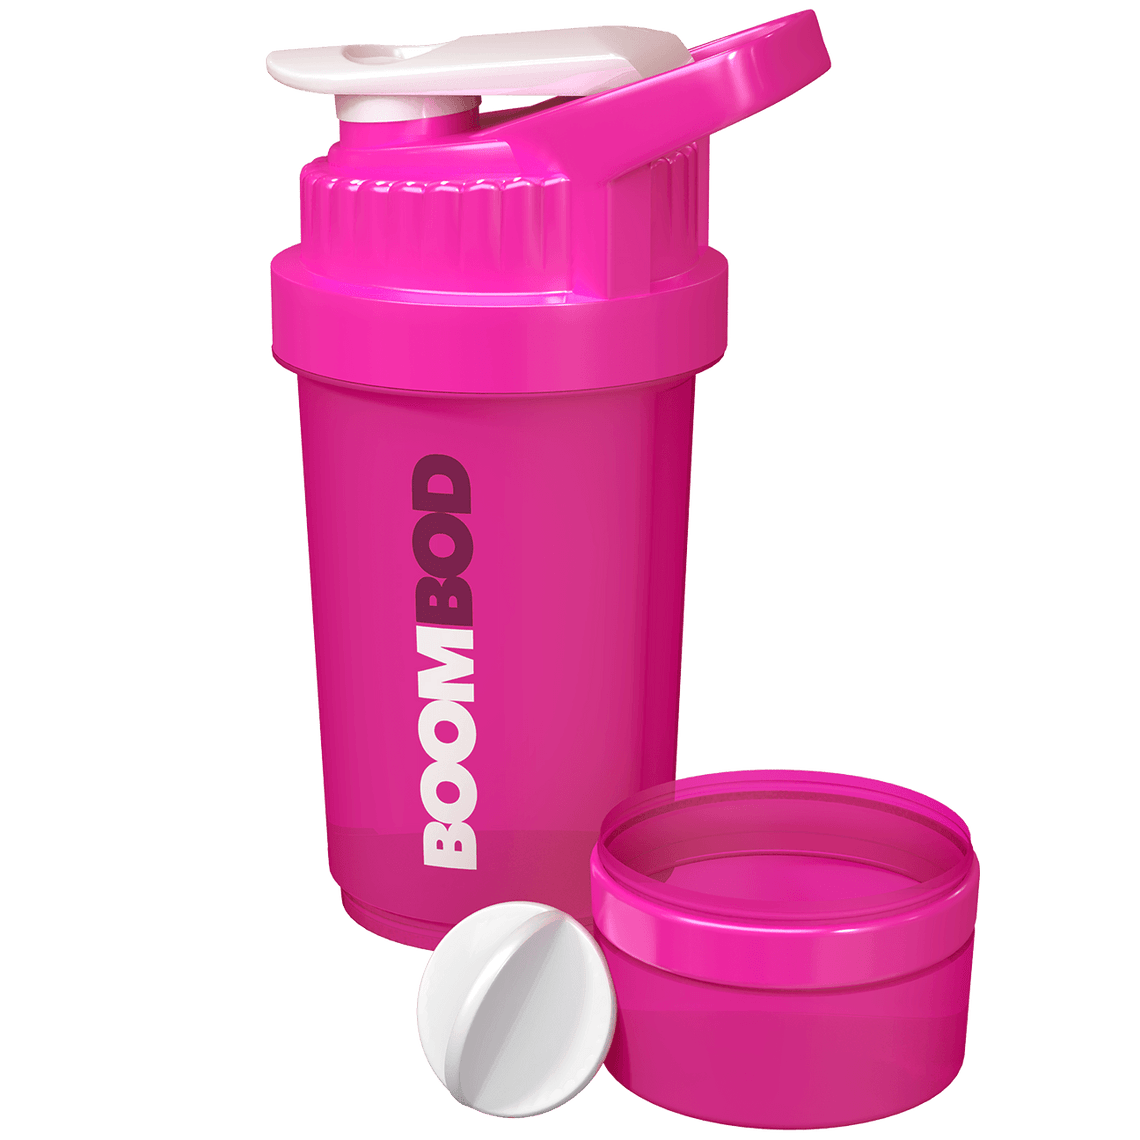 Shaker Bottle with Stackable Compartments - 22 Ounce Bottle + Pill